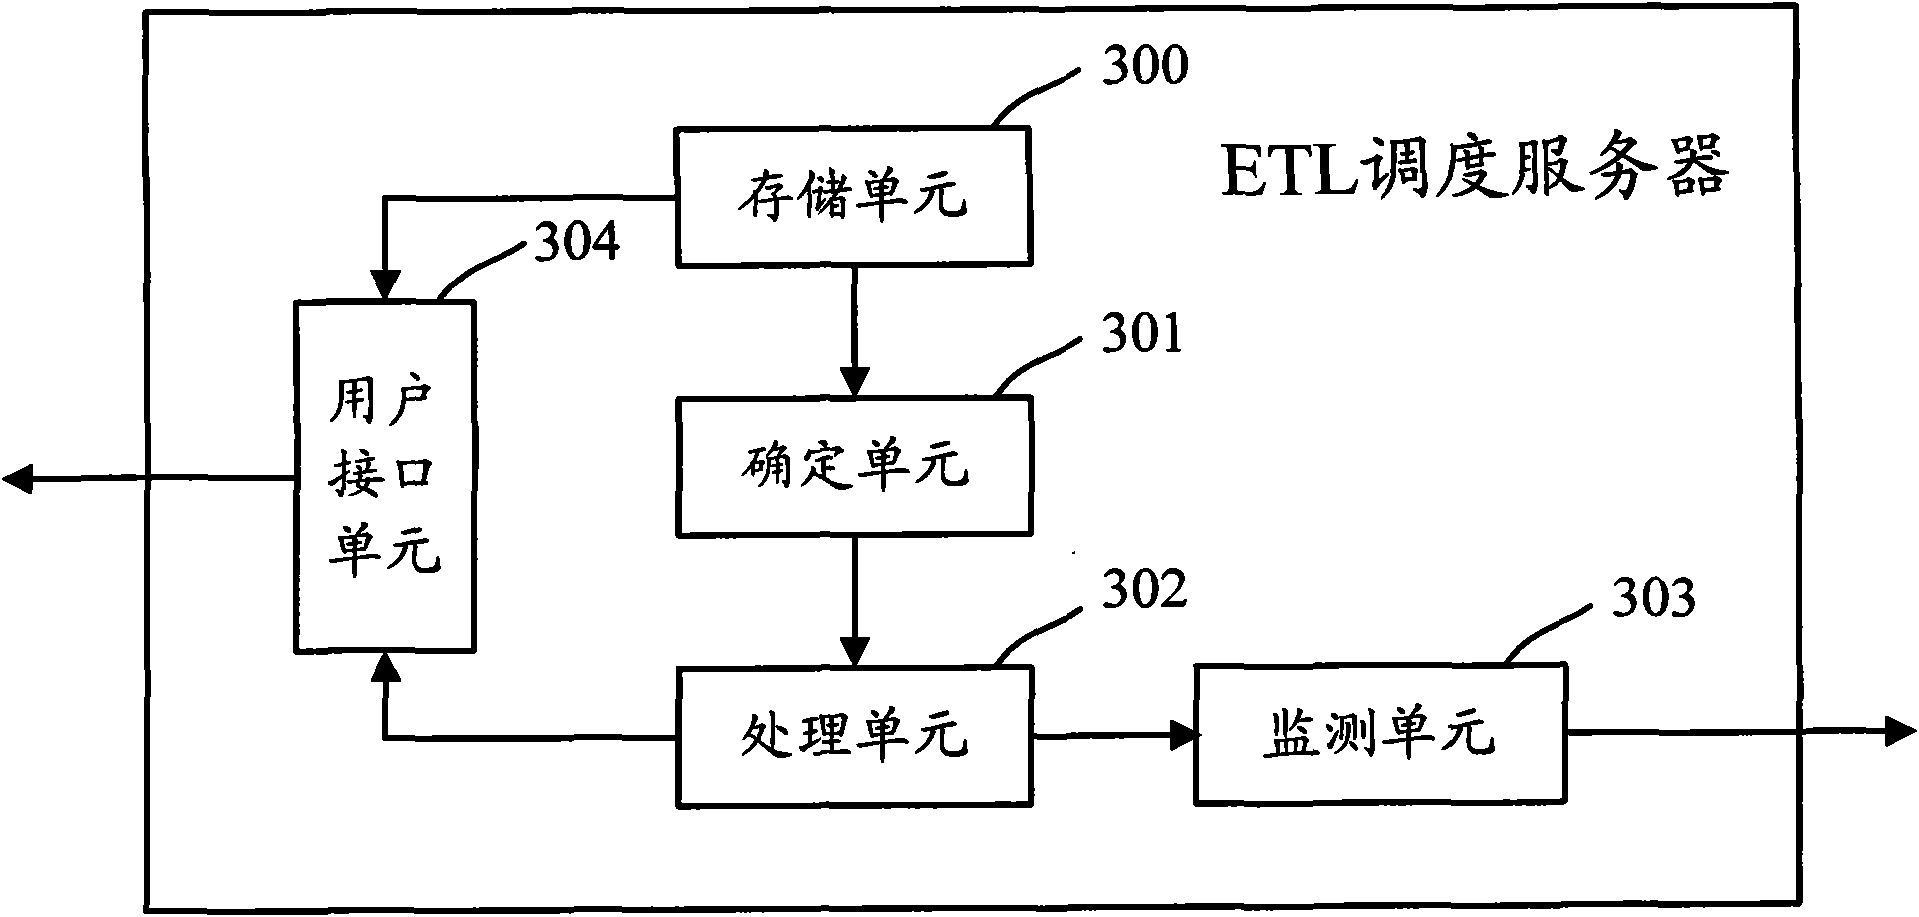 Method and apparatus for implementing ETL scheduling